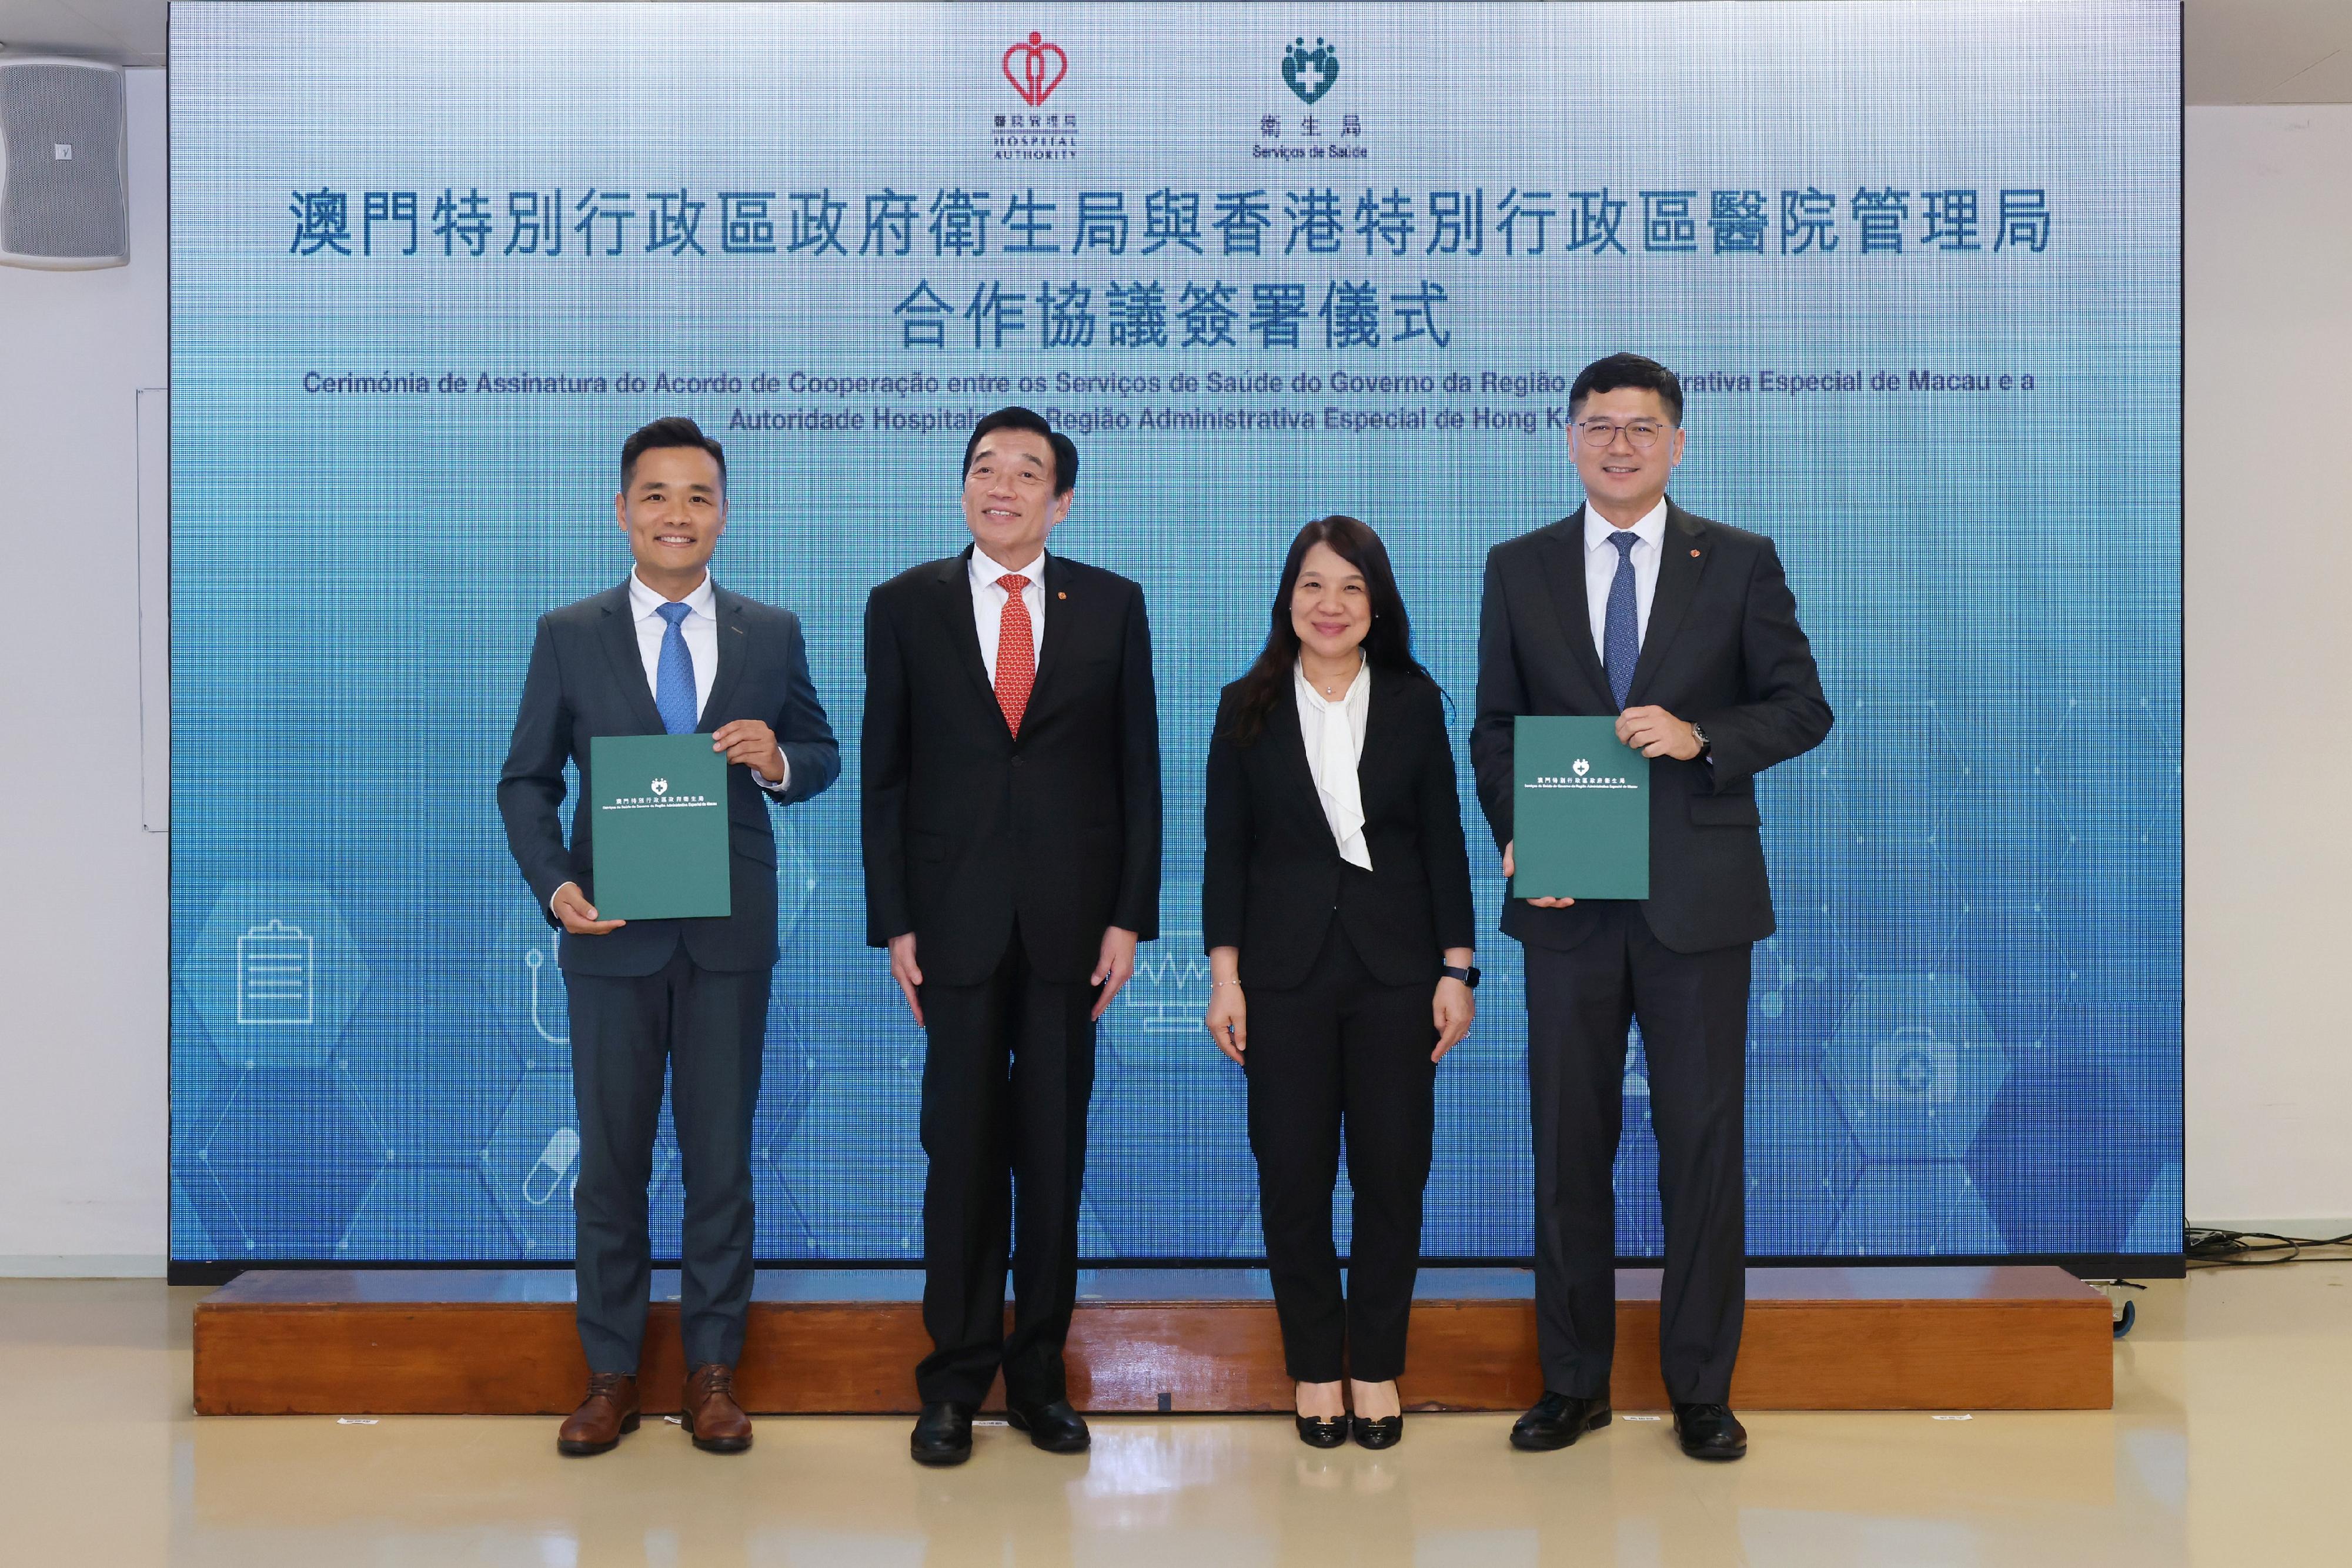 The Hospital Authority (HA) Chief Executive, Dr Tony Ko, and the Director of the Health Bureau of the Macao Special Administrative Region Government, Dr Lo Iek-long, yesterday (August 28) renewed a five-year (2023-2028) collaboration agreement to strengthen co-operation in the medical and health field between the two places and fully support the healthcare collaboration in the Guangdong-Hong Kong-Macao Greater Bay Area. Photo shows the HA Chairman, Mr Henry Fan (second left); Dr Ko (first right); the Chief of Office of the Secretary for Social Affairs and Culture of Macao, Ms Ho Ioc-san (second right); and Dr Lo (first left) after the signing ceremony.
